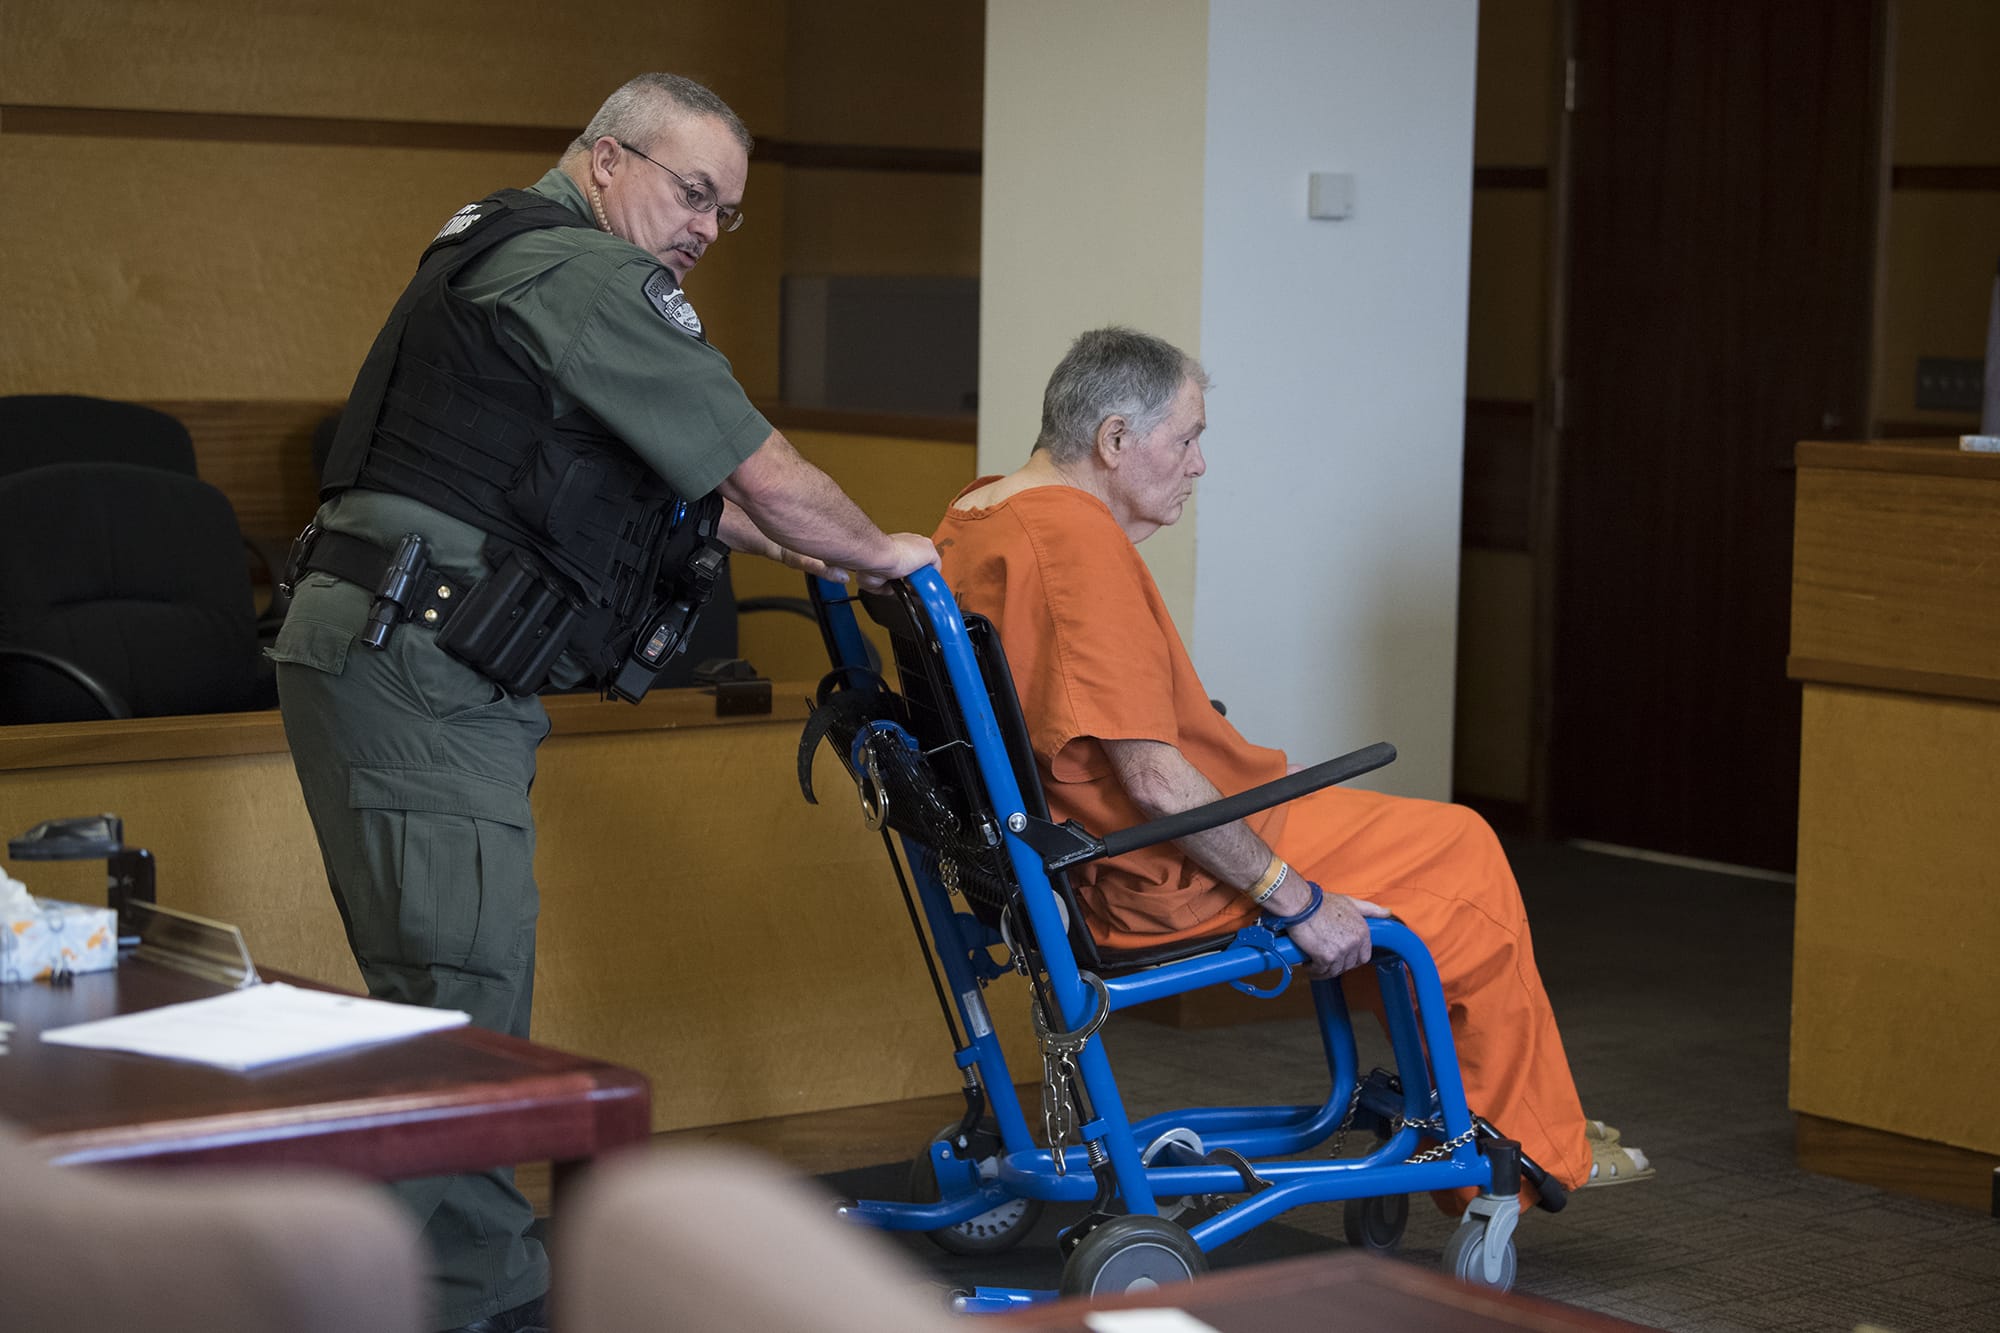 David Jay Sterling, 74, is wheeled into the courtroom for sentencing in a decades-old serial rape case after spending years in federal prison at Clark County Superior Court on Thursday morning, Aug. 8, 2019. The court imposed five suspended life sentences in the case.